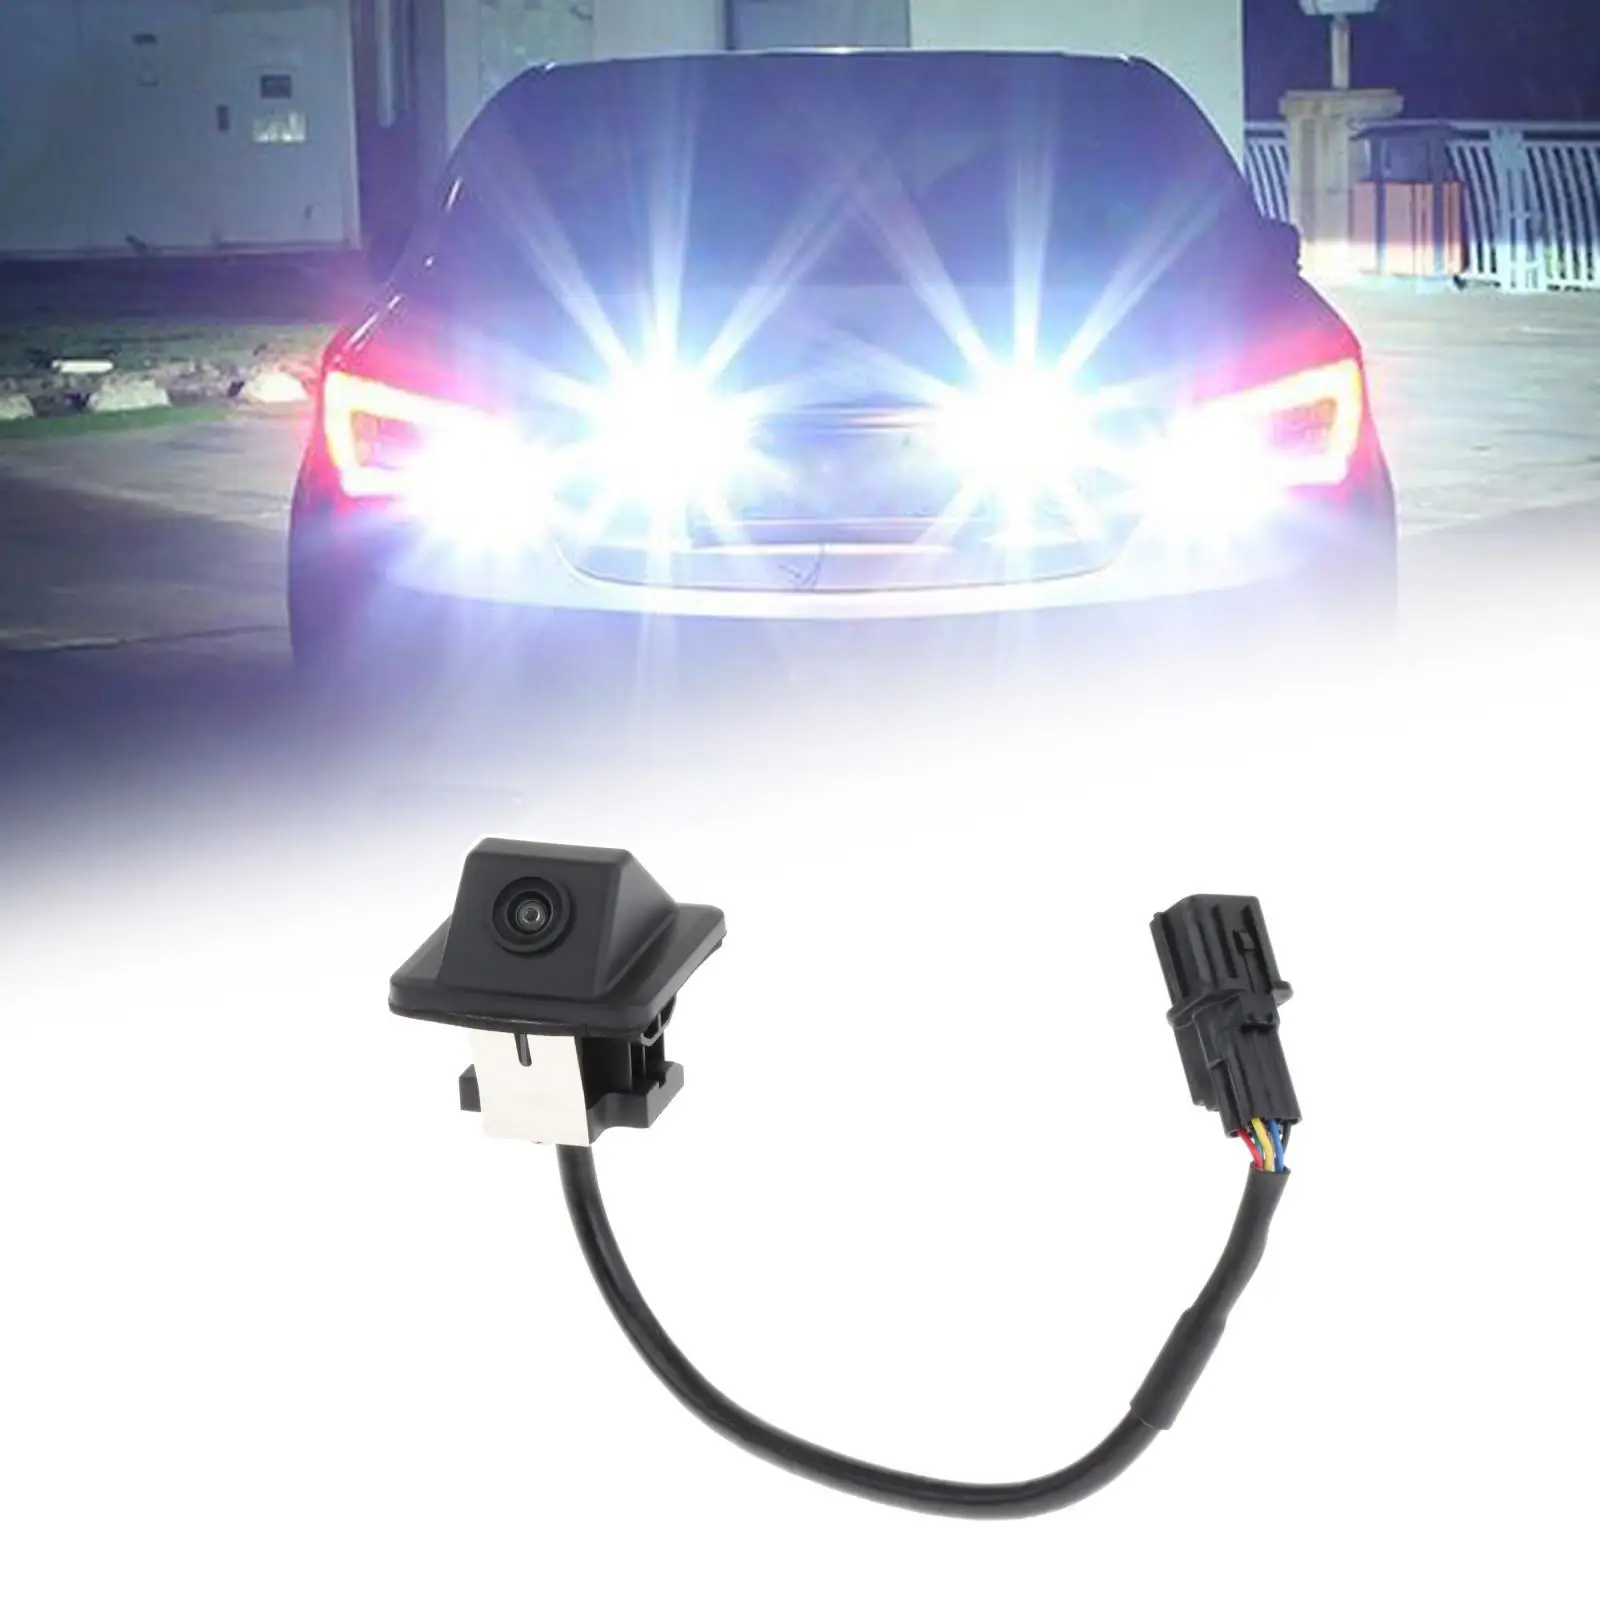 Rear View Back up Camera 95760-2T650 Easily Install Car Backup Camera for Kia Optima 2014 to 2015 Assembly Replacement